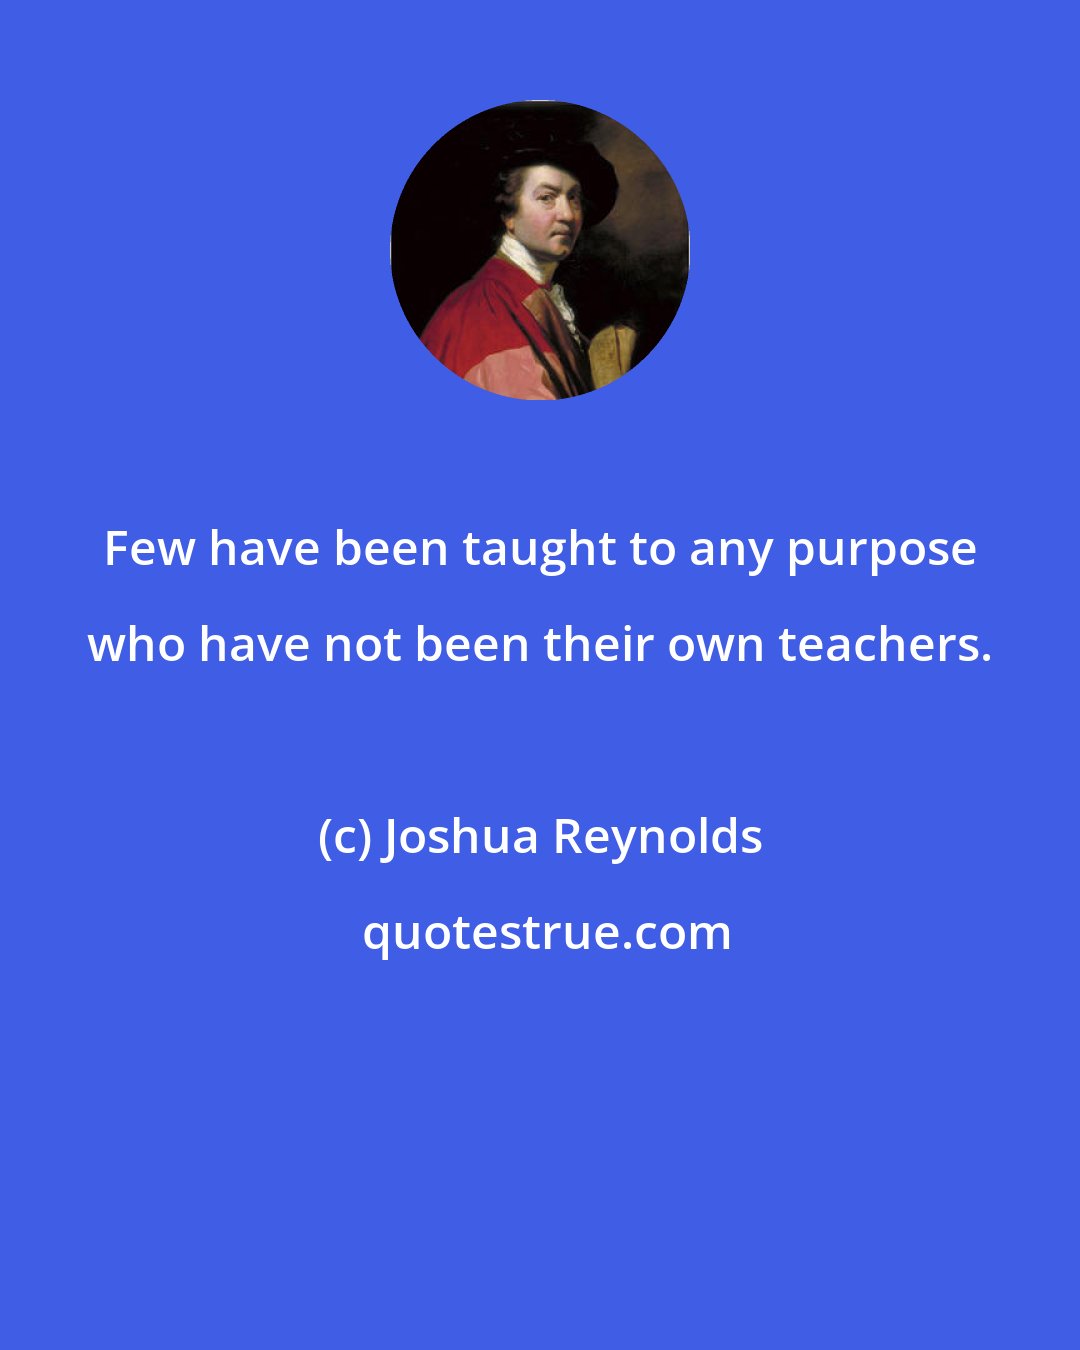 Joshua Reynolds: Few have been taught to any purpose who have not been their own teachers.